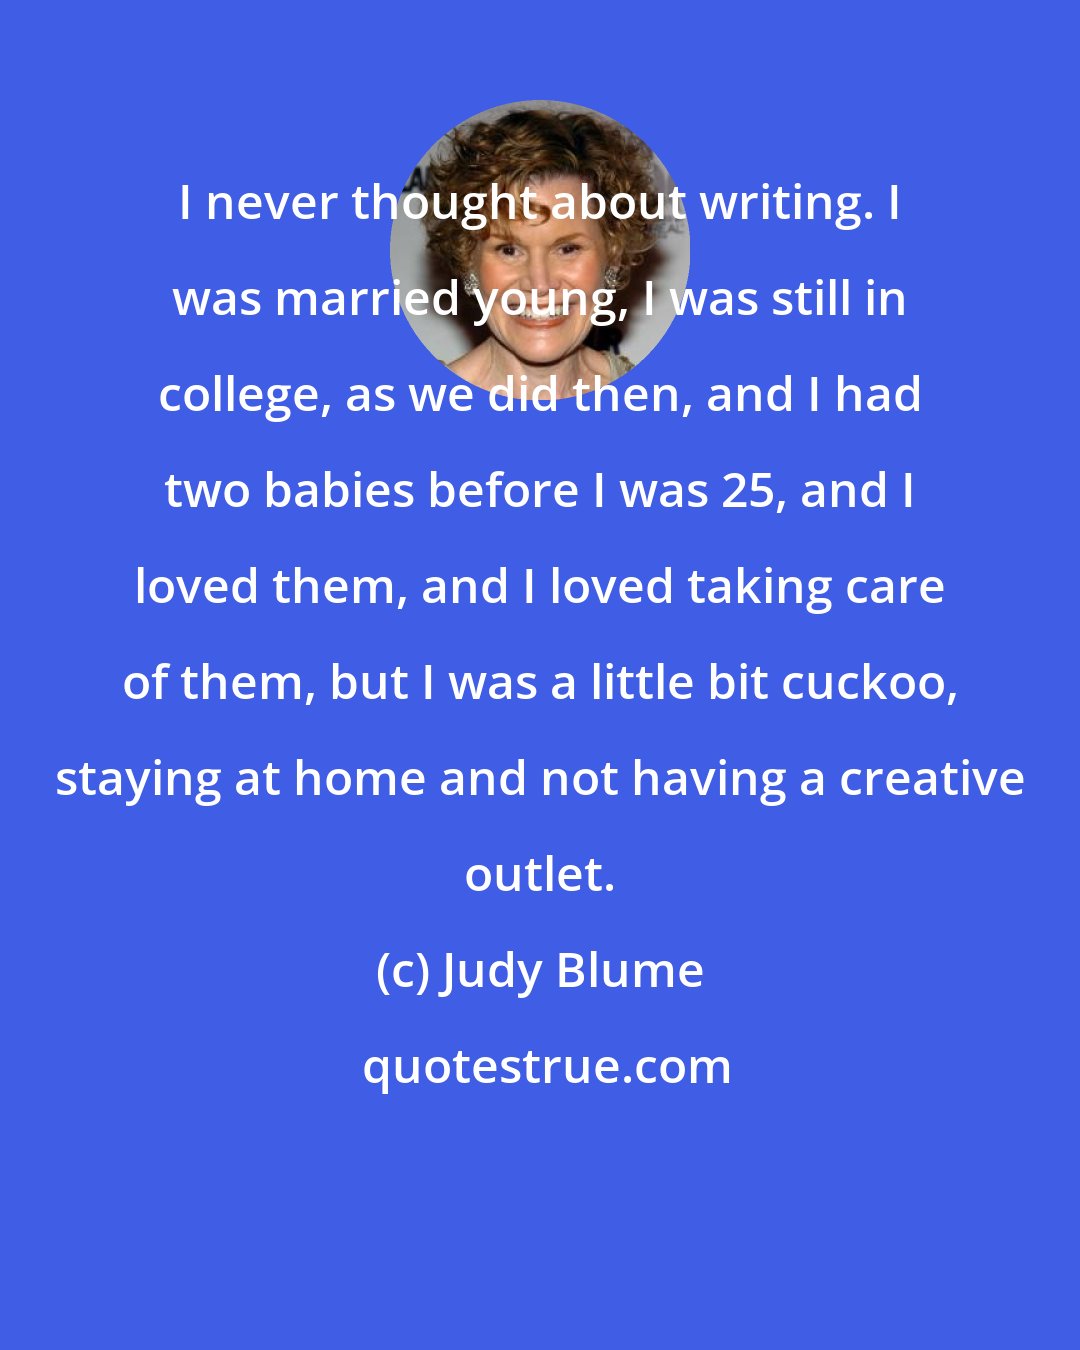 Judy Blume: I never thought about writing. I was married young, I was still in college, as we did then, and I had two babies before I was 25, and I loved them, and I loved taking care of them, but I was a little bit cuckoo, staying at home and not having a creative outlet.